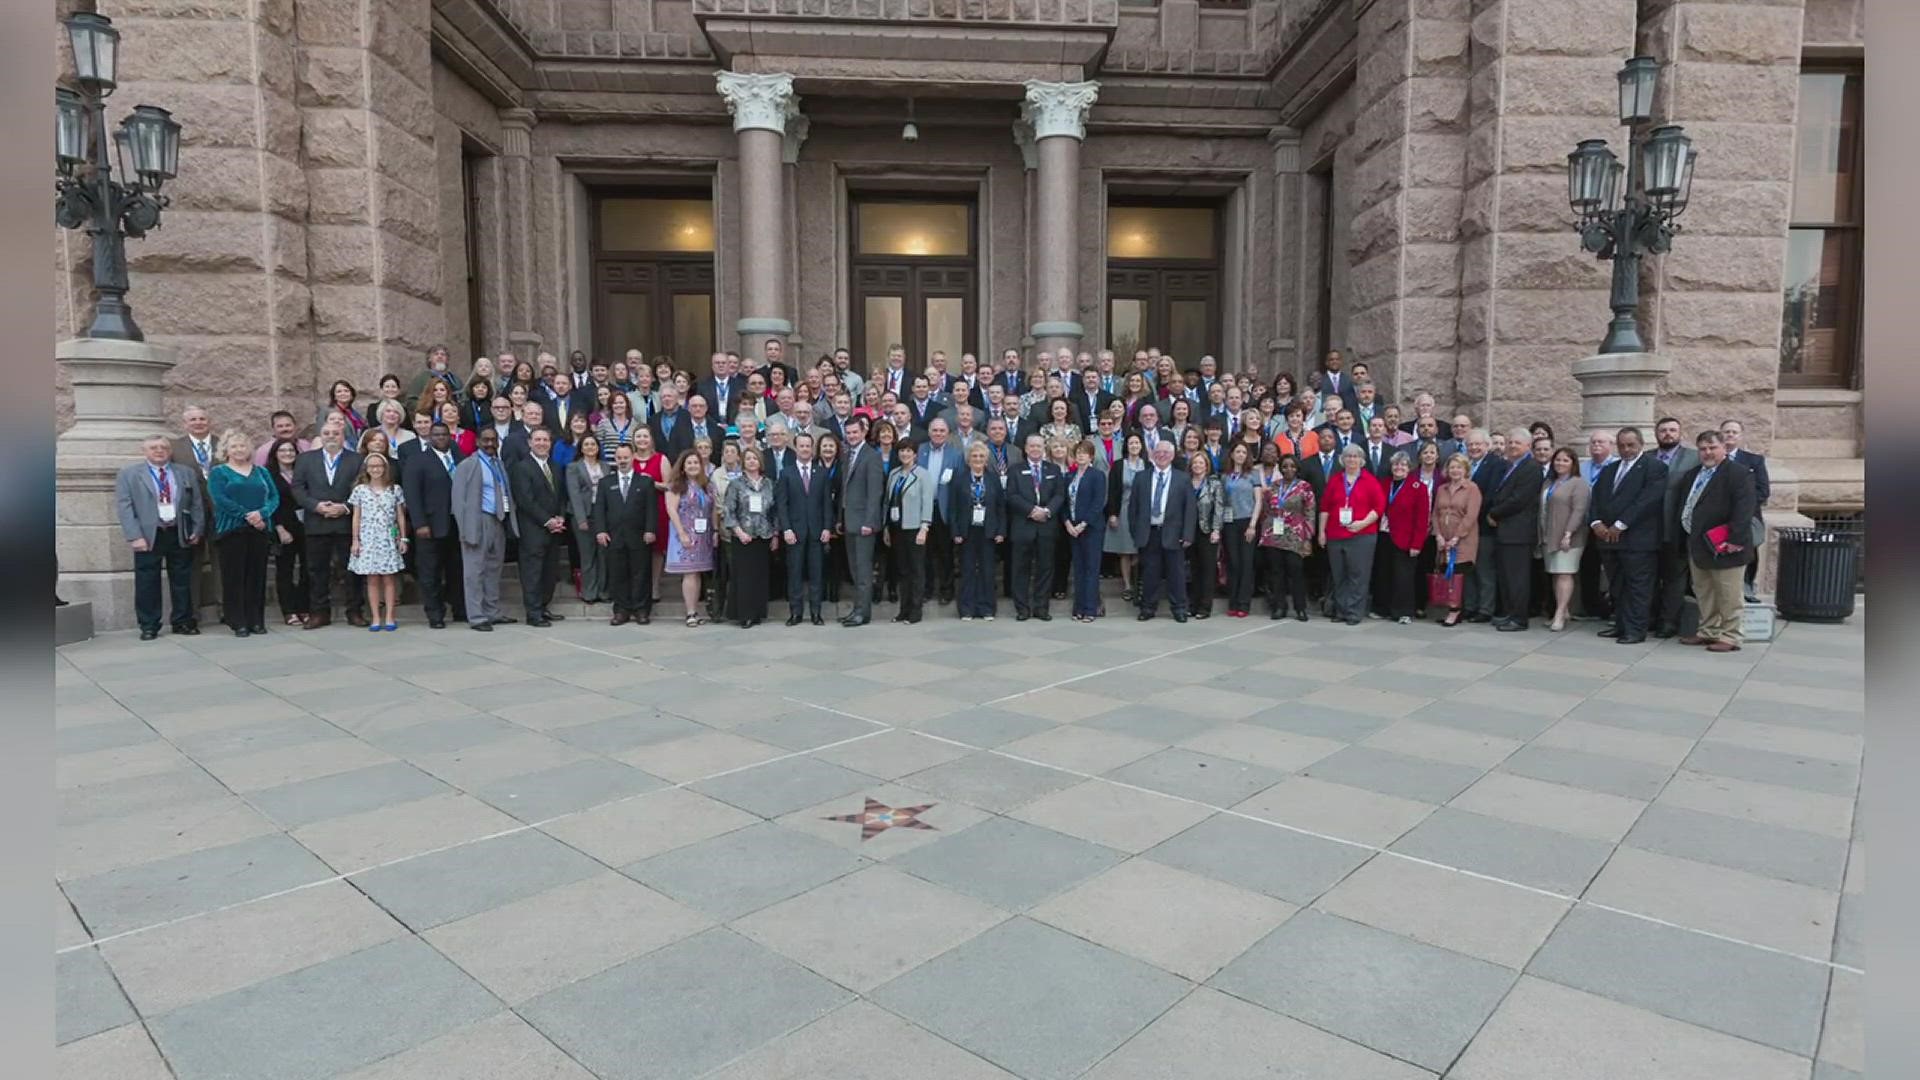 The "Golden Triangle Days" event in Austin is a special opportunity for local leaders to meet with state legislators and tackle top issues impacting our region.